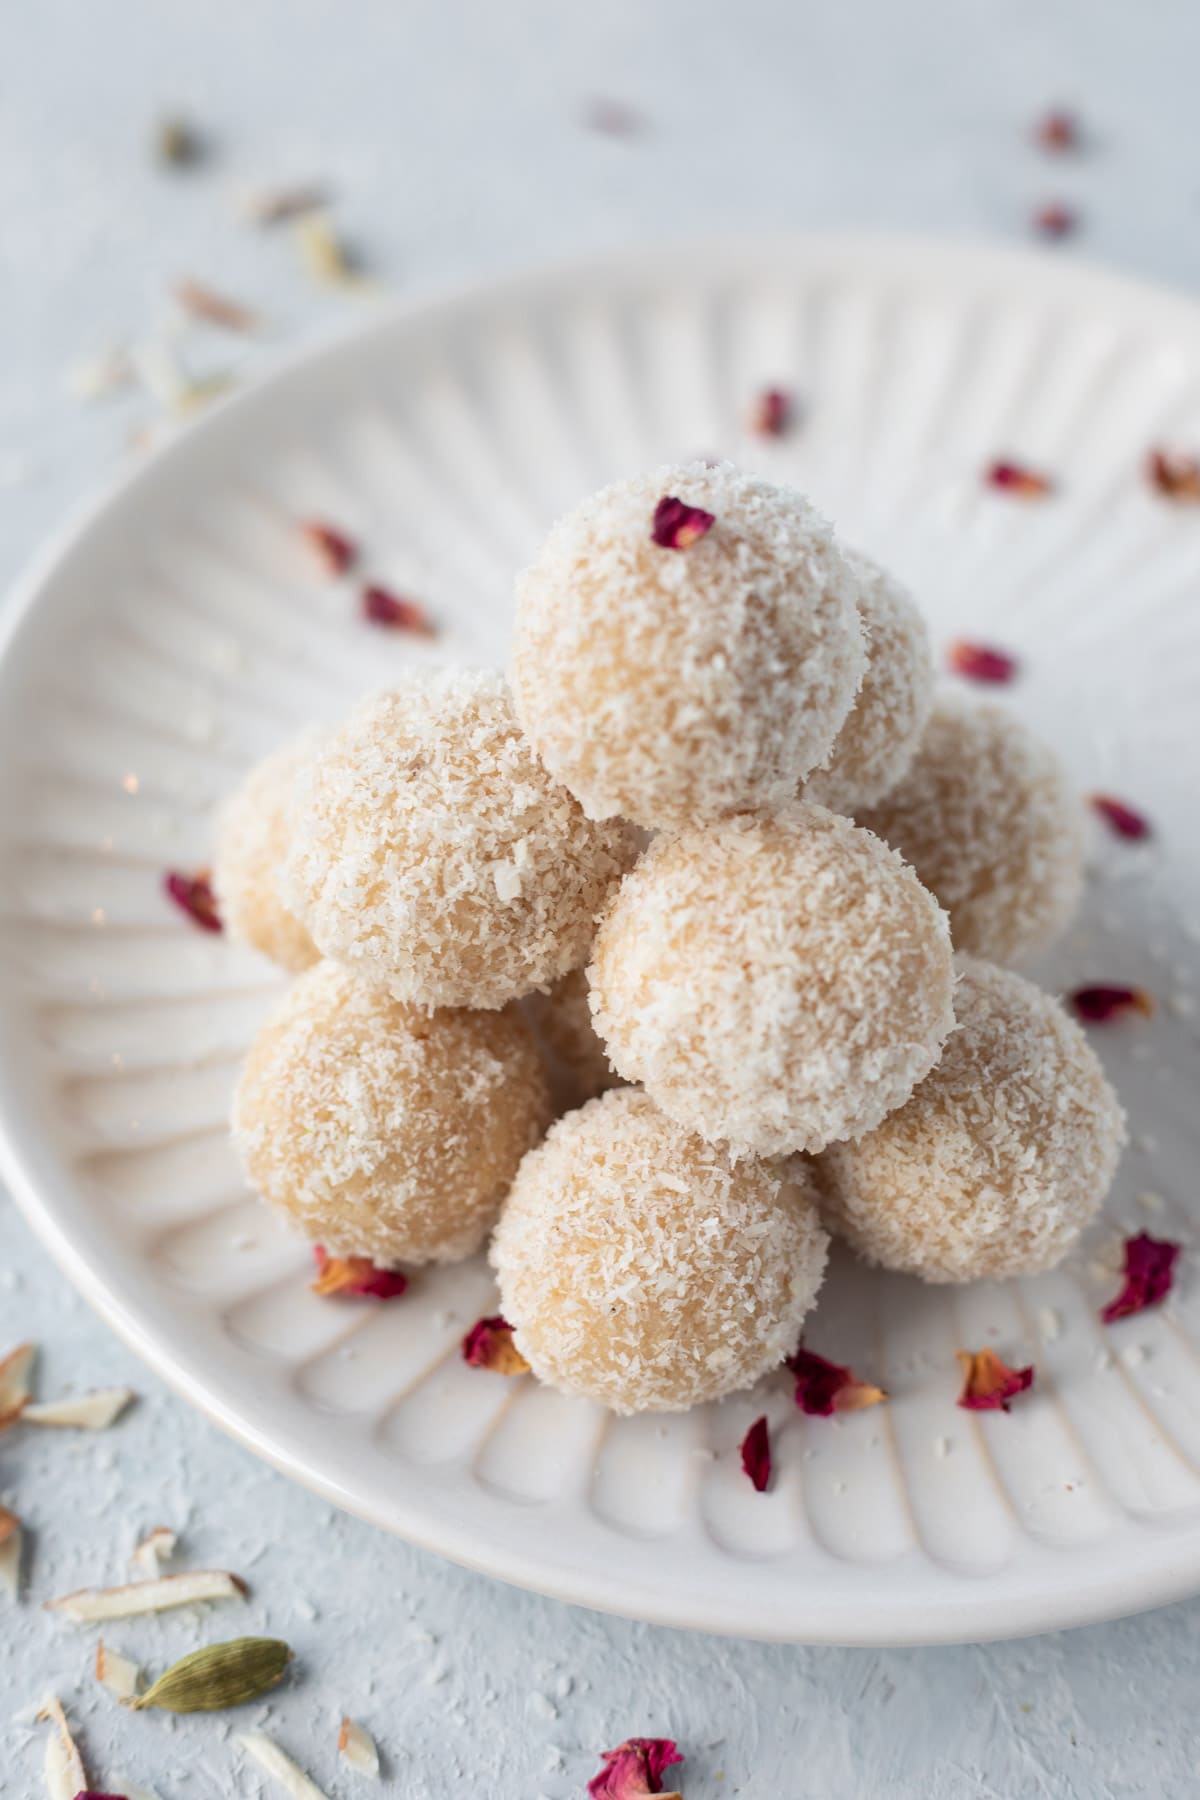 Badam ladoo with coconut in a white plate